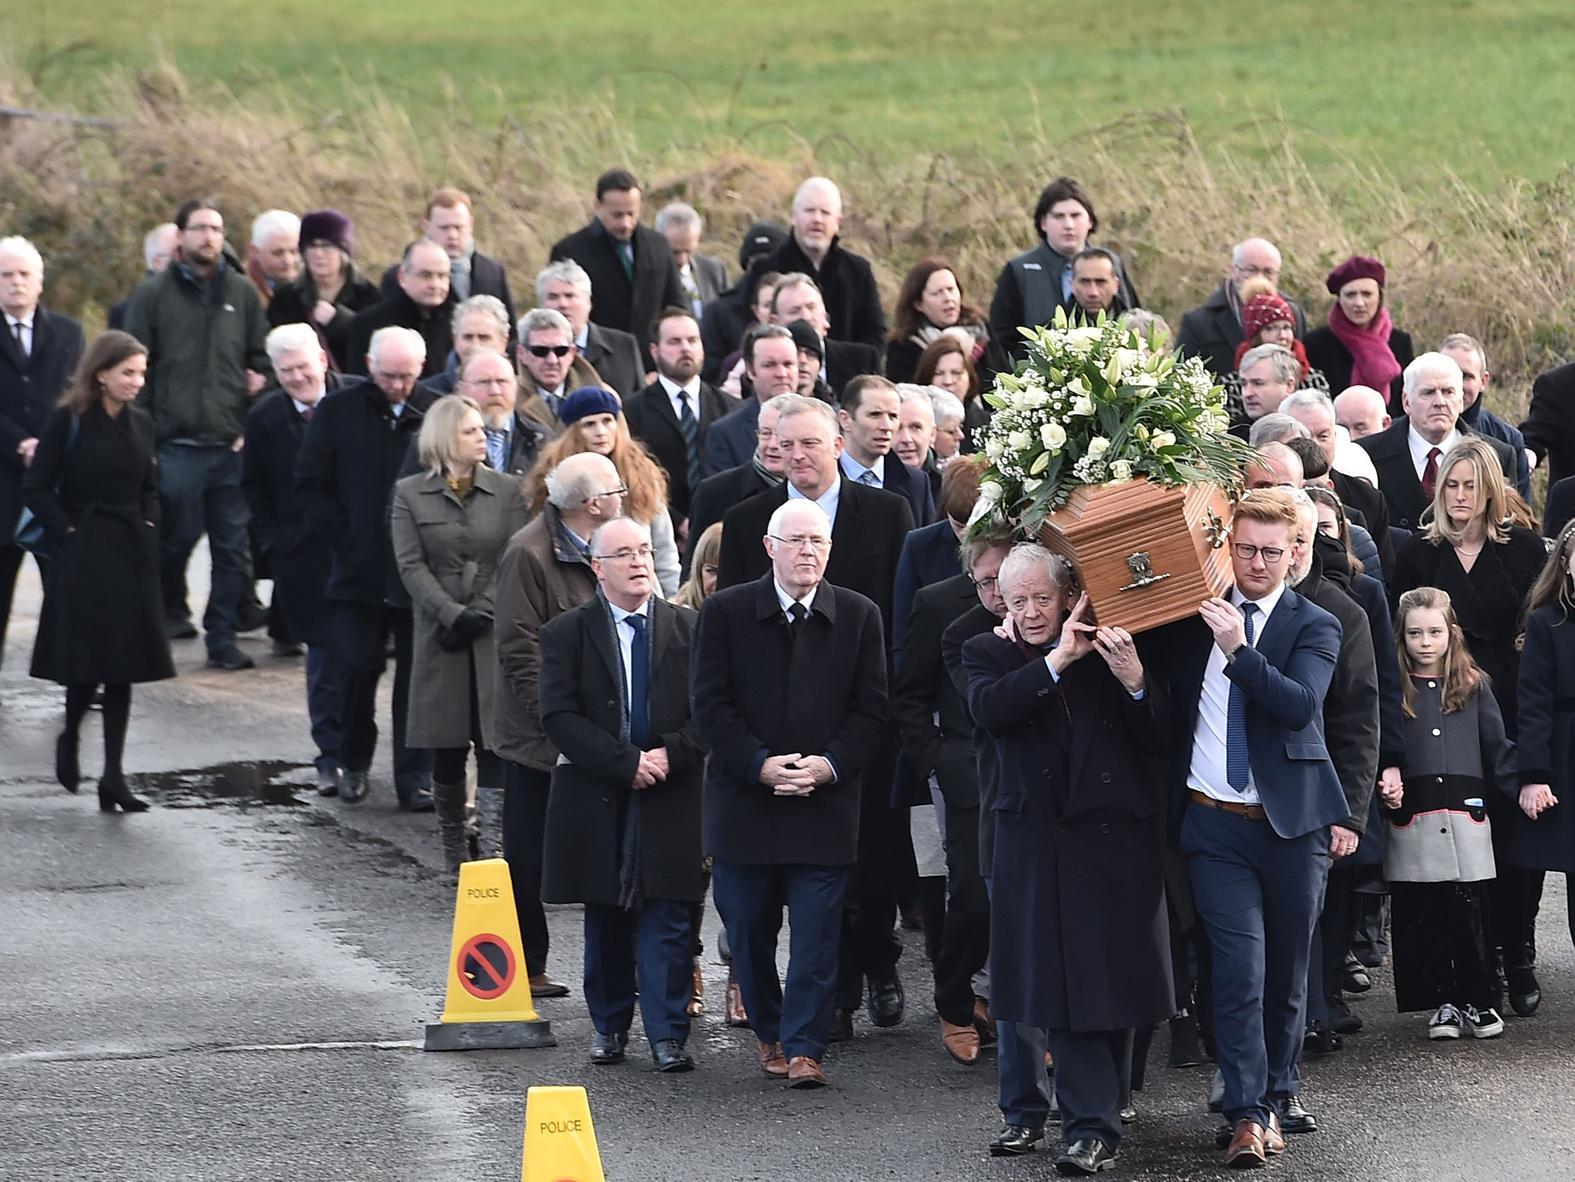 Mourners maker their way to the chapel.